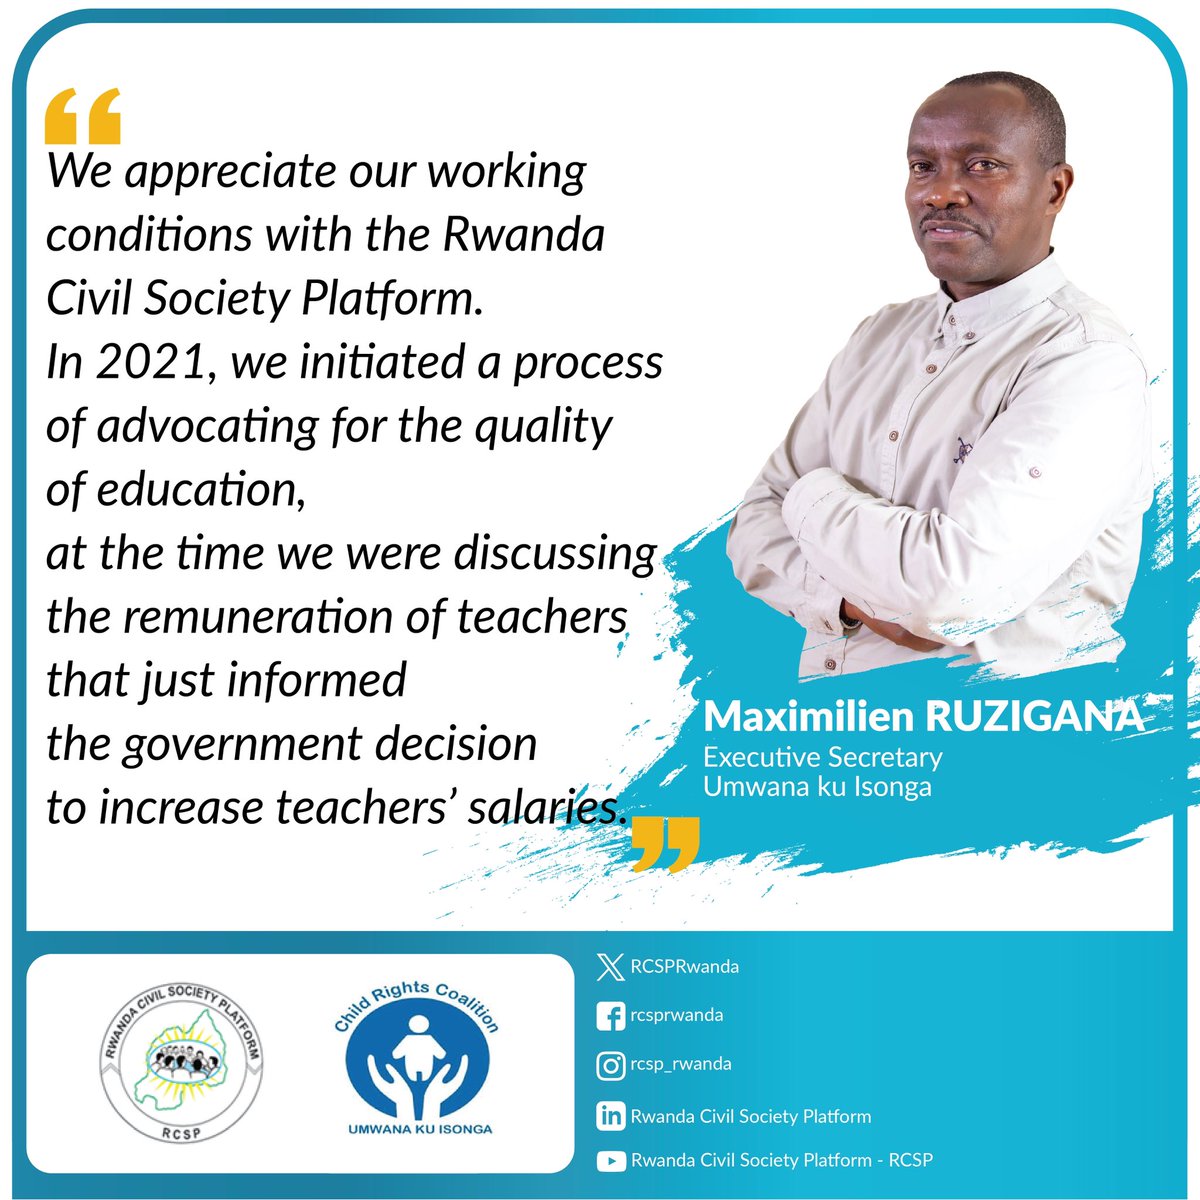 “We appreciate working with @RCSPRwanda. In 2021, we initiated a process of advocating for the quality of education, we were discussing the remuneration of teachers that just informed Gov. decision to increase teachers' salaries. - Maximilien RUZIGANA ES @Umwanakuisonga #CSORw